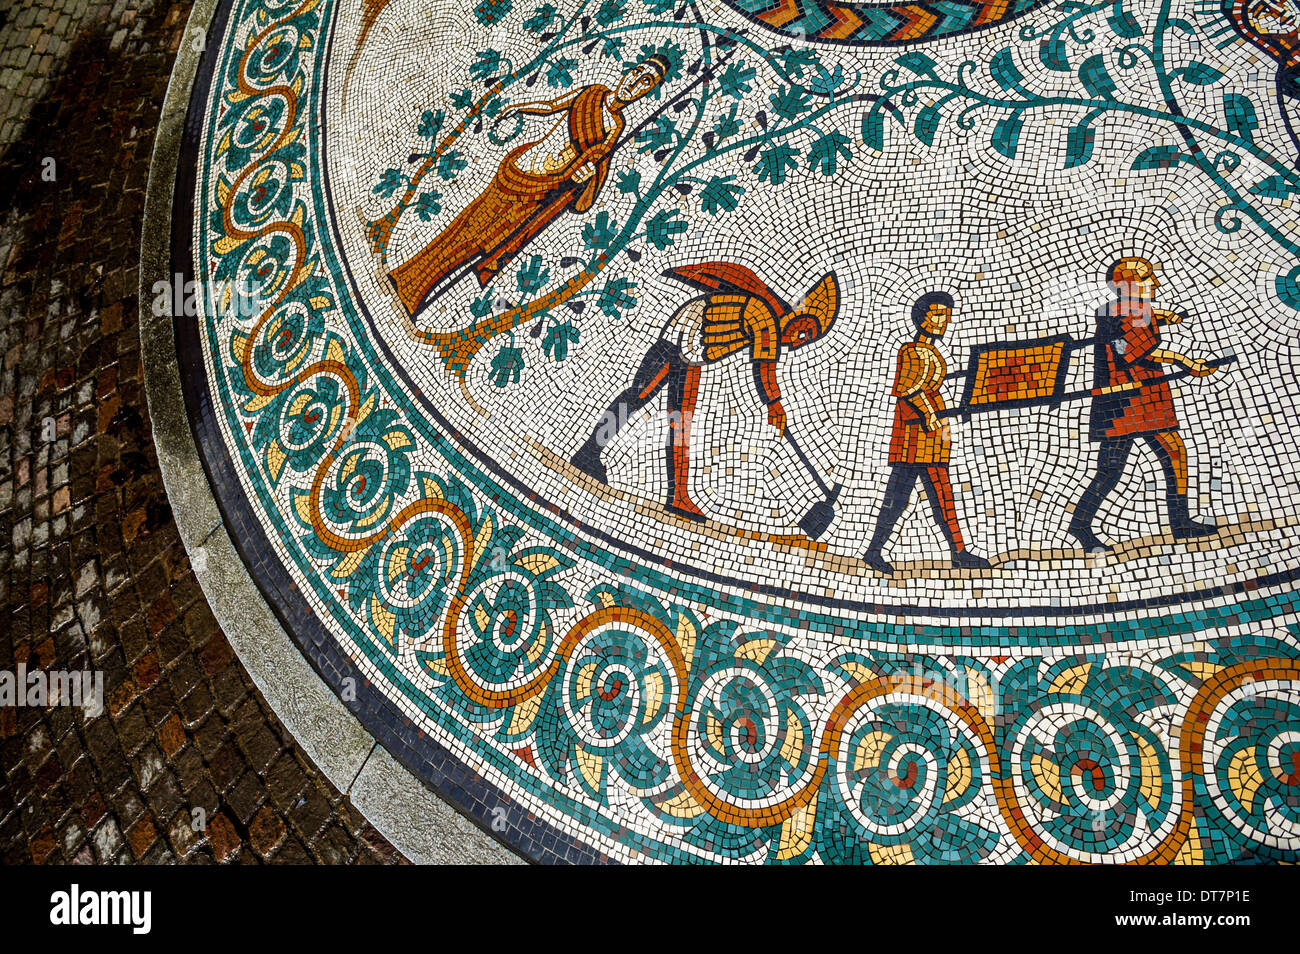 Copy of a Roman mosaic in the city of Chester, England, uk Stock Photo